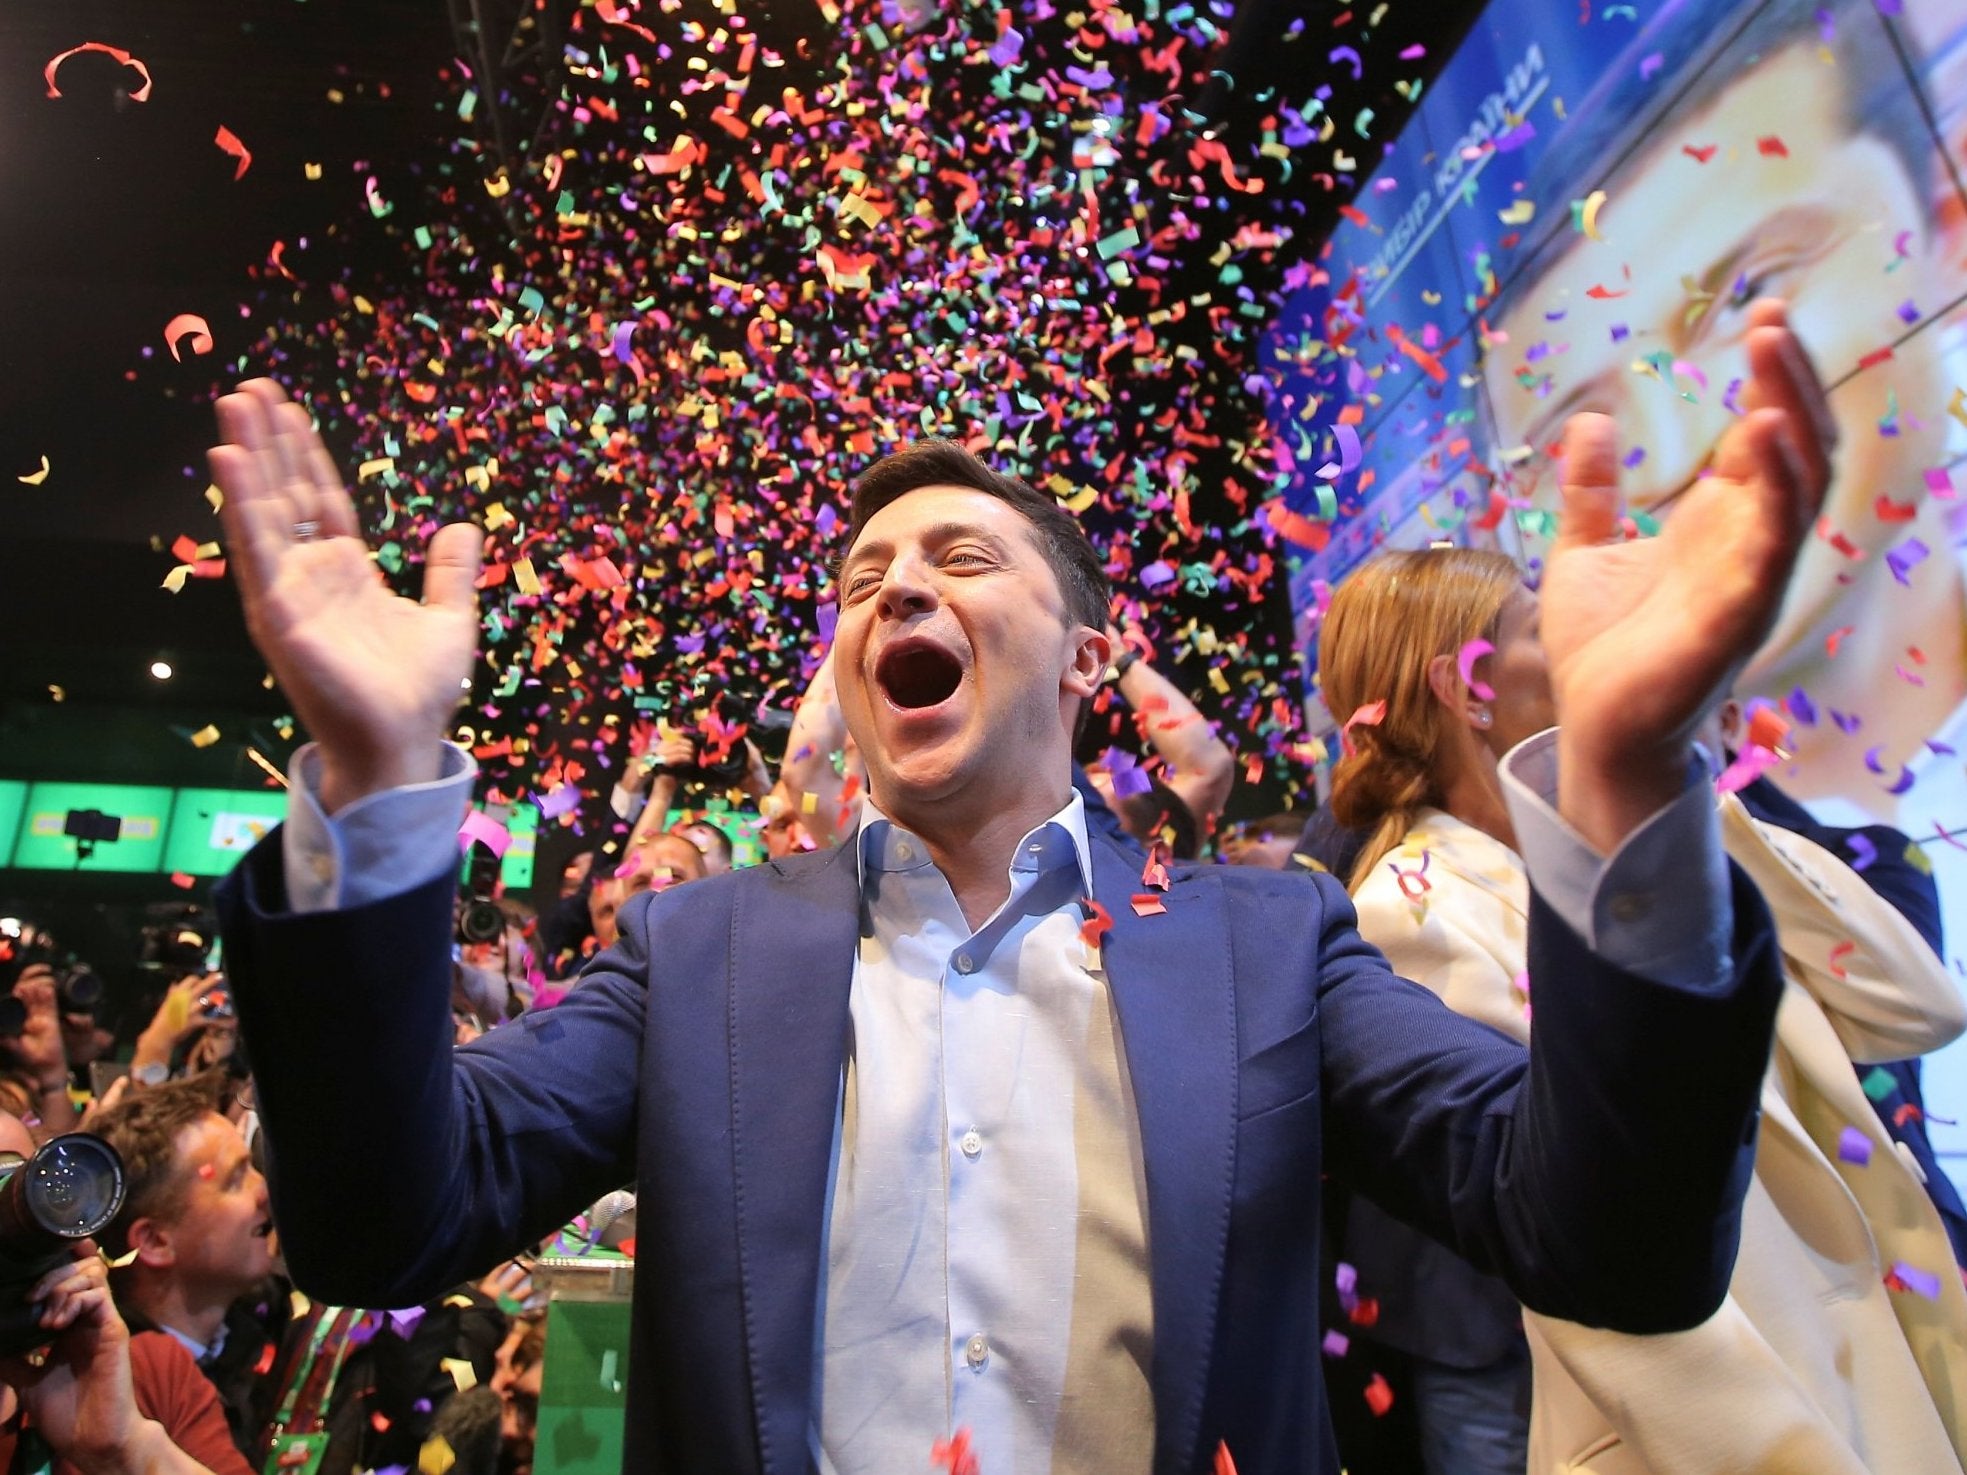 Ukrainian presidential candidate Volodymyr Zelenskiy reacts following the announcement of the first exit poll